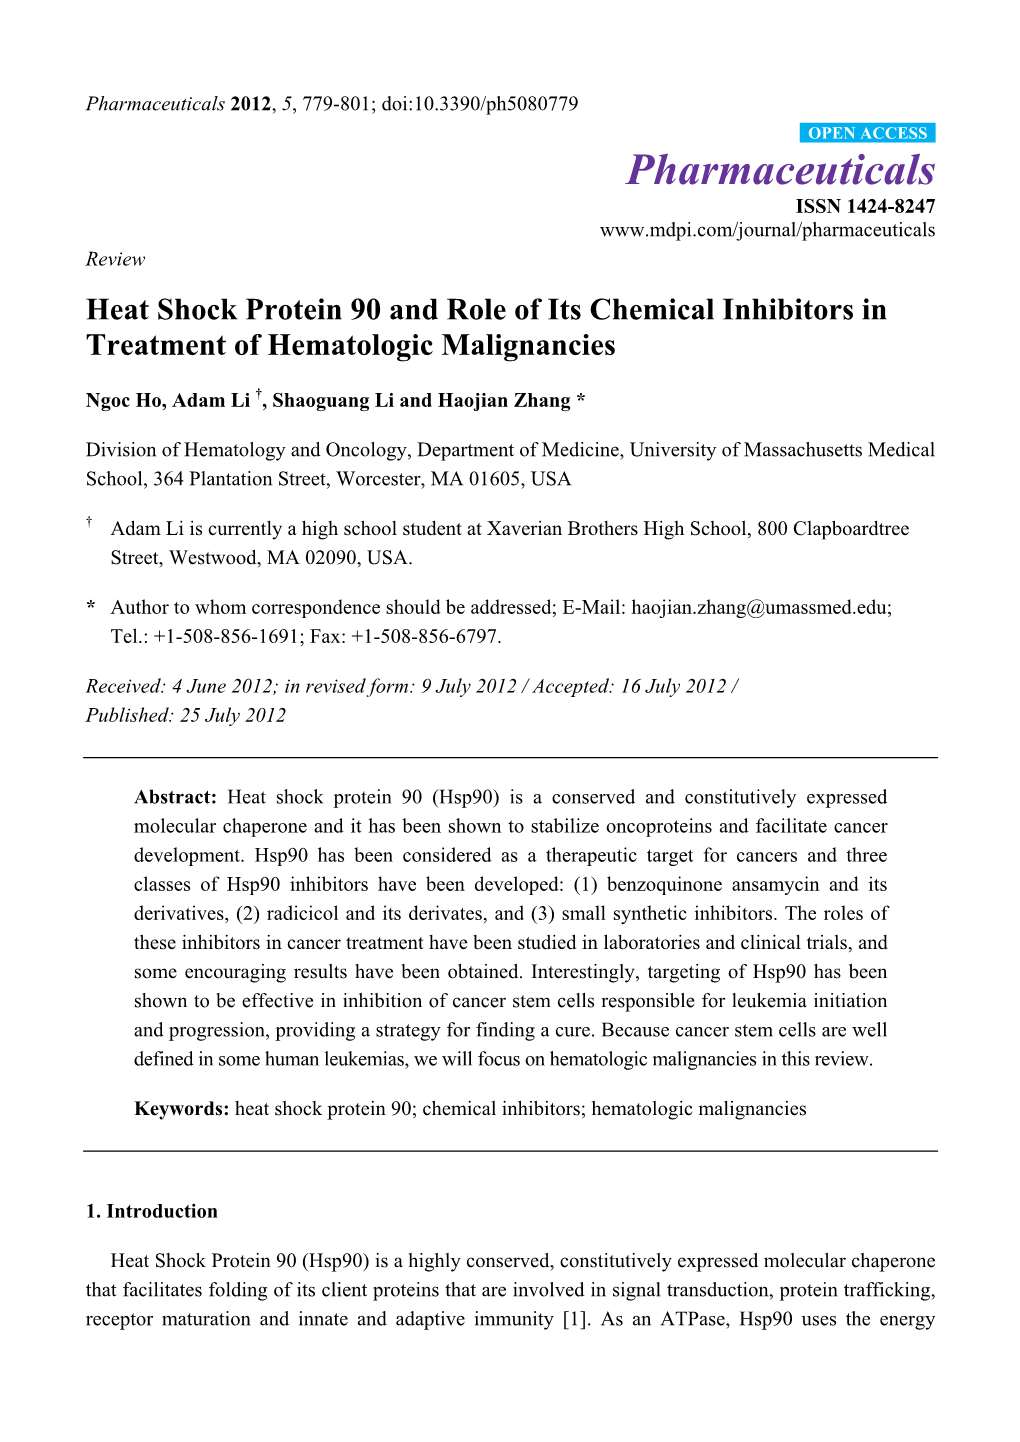 Heat Shock Protein 90 and Role of Its Chemical Inhibitors in Treatment of Hematologic Malignancies